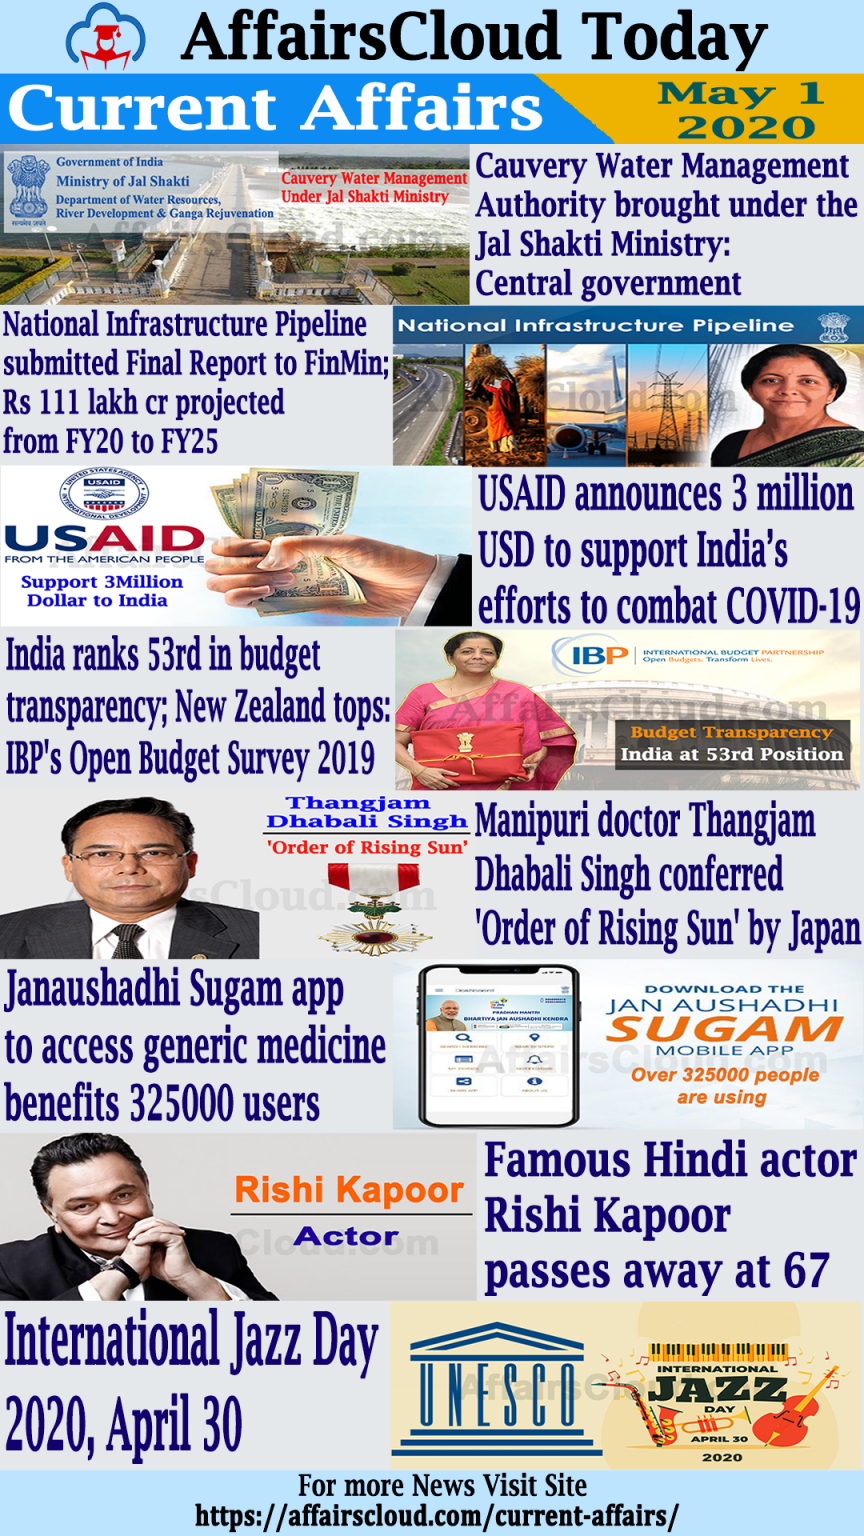 Top Current Affairs 1 May 2020 2012